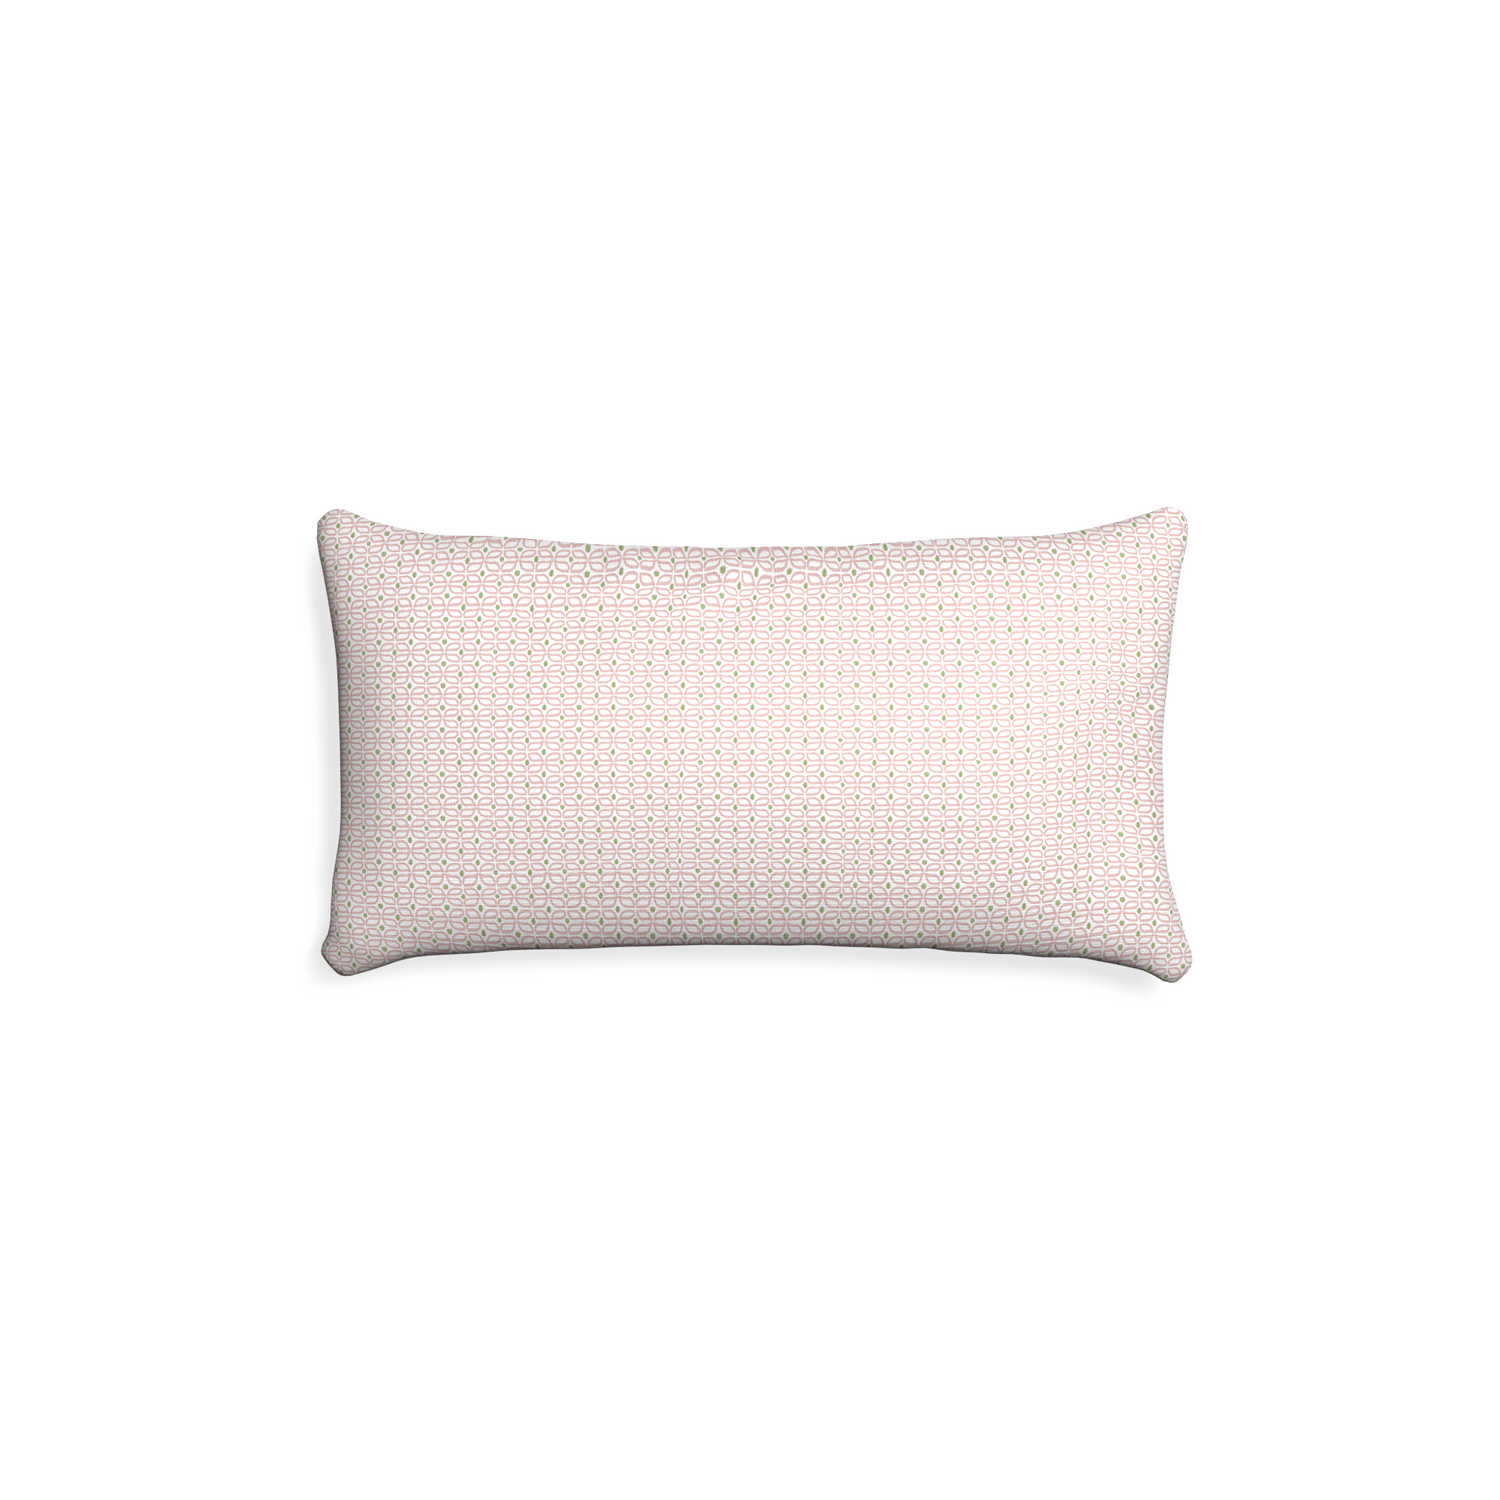 Petite-lumbar loomi pink custom pink geometricpillow with none on white background